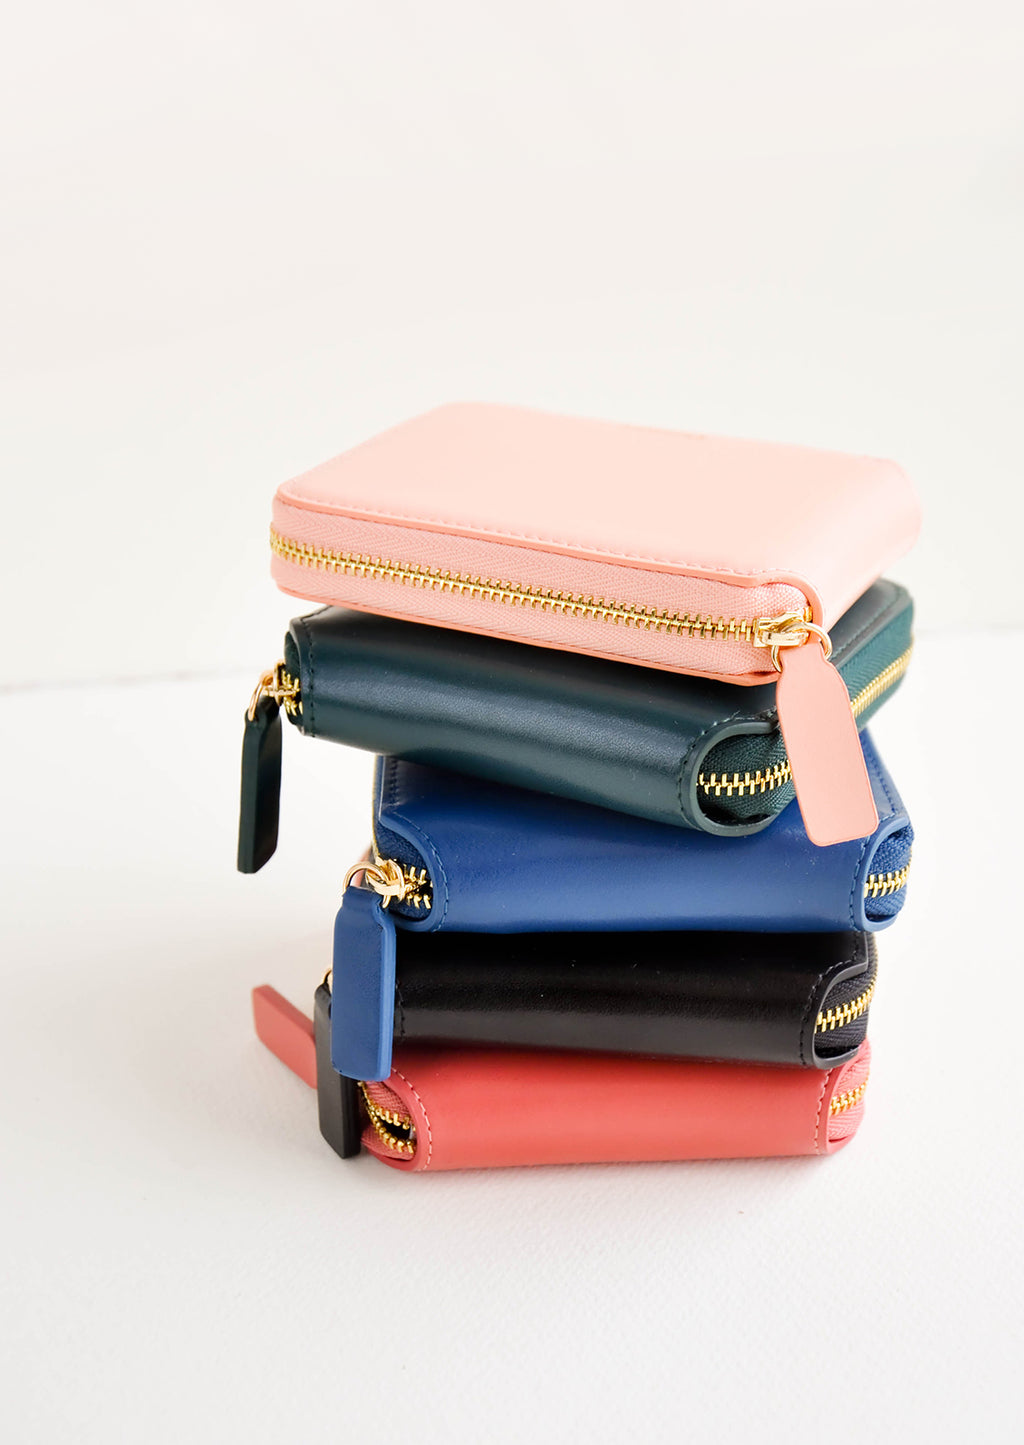 9: Product show showing multiple colors of zip wallet in a stack.